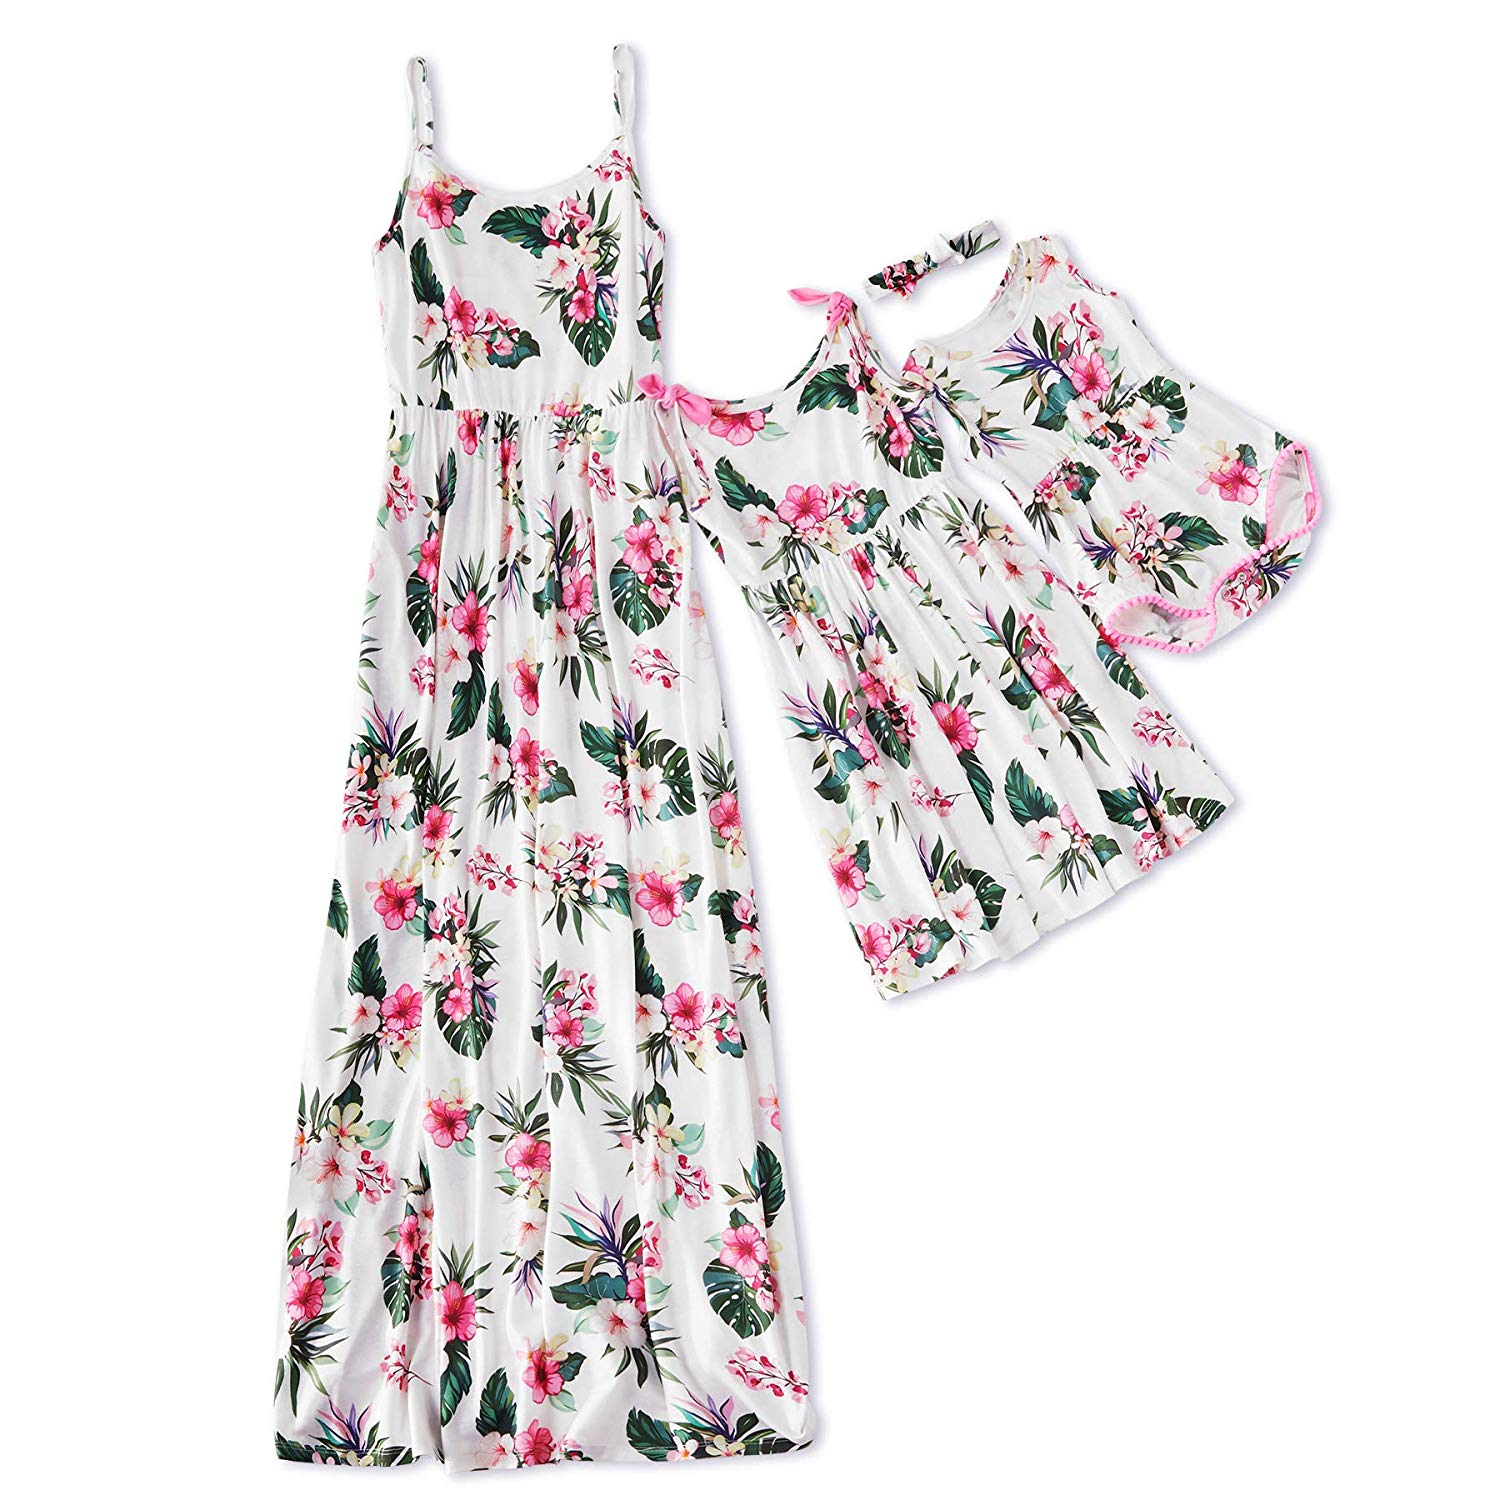 Yaffi Mommy and Me Matching Maxi Dress Floral Printed Sleeveless Dress for Mother and Daughter 